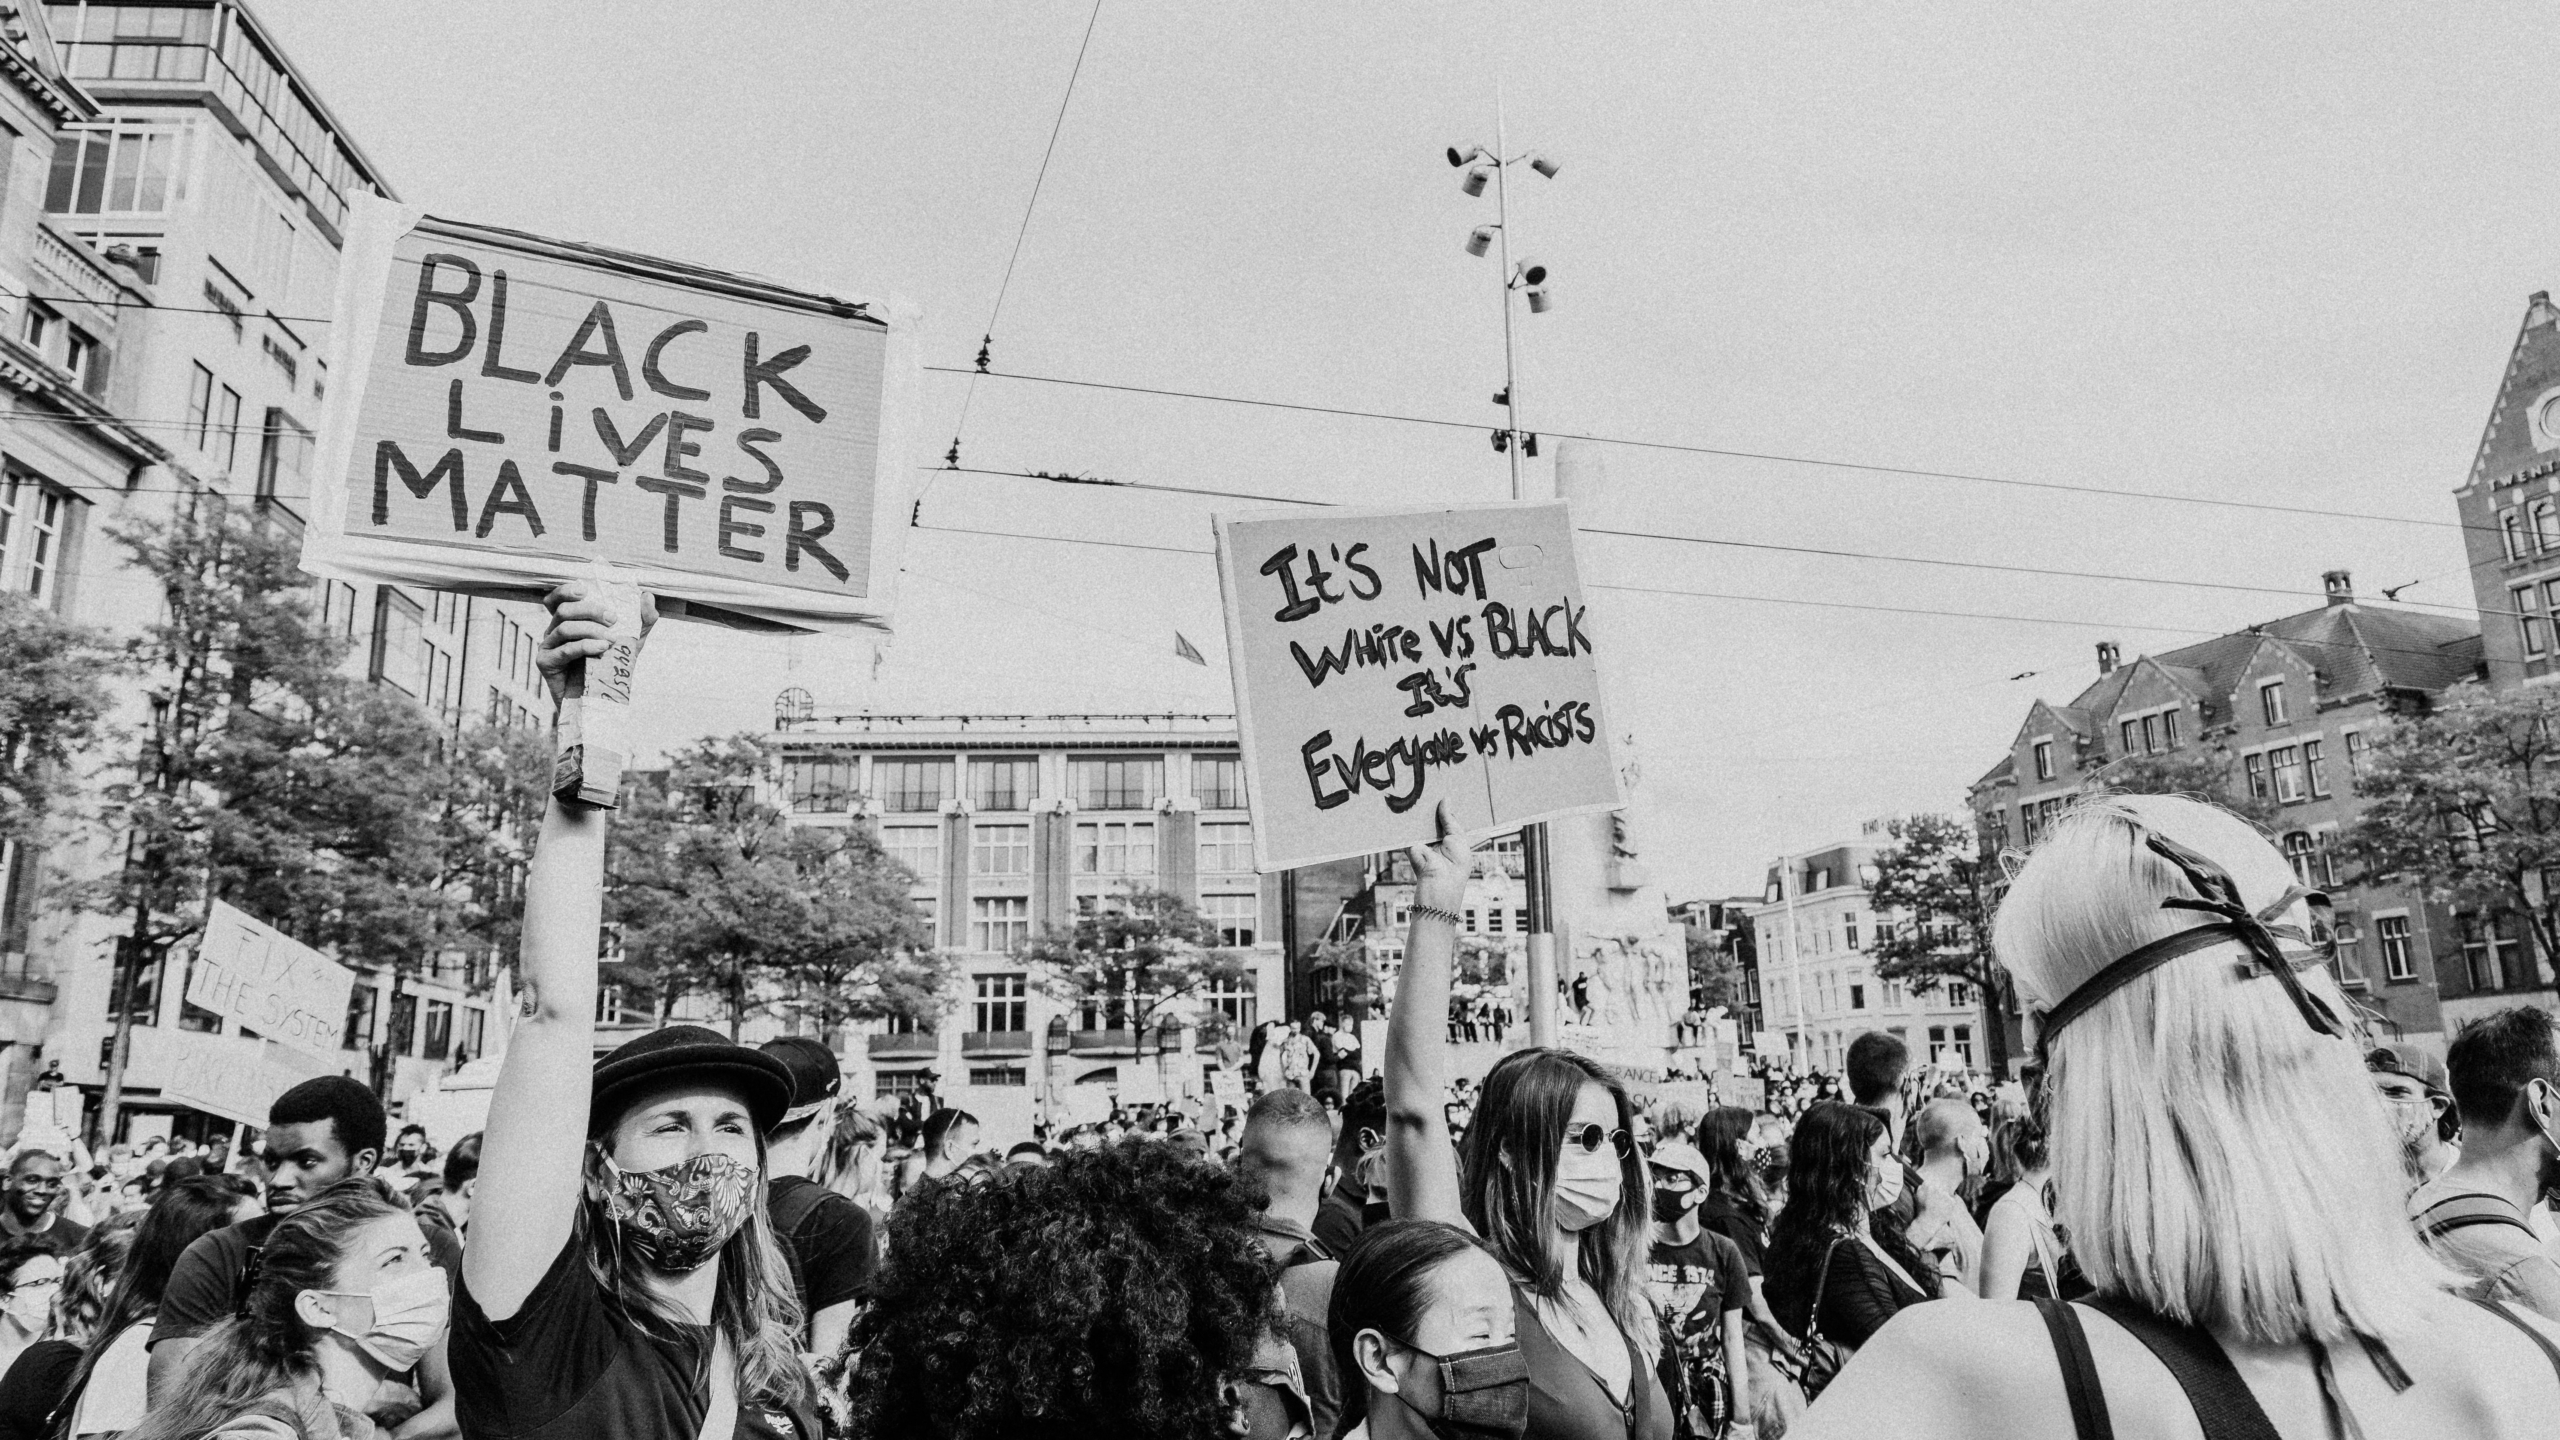 Black and white photo of a crowd protesting. Two signs are being held up, one reads "Black Lives Matter" and the other reads "It's not white vs black, it's everyone vs racists."